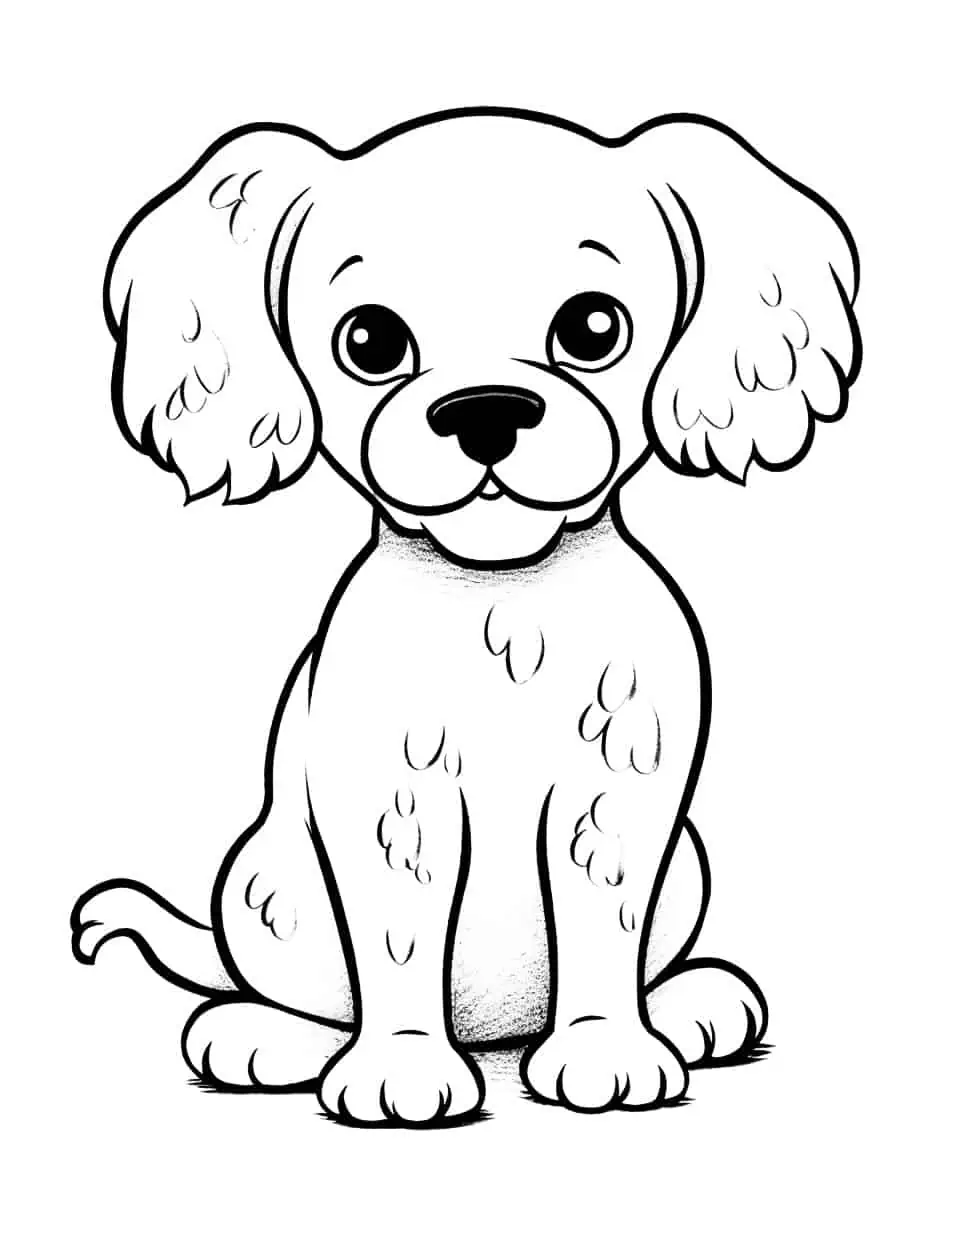 Easy Poodle Drawing Coloring Page - A simple drawing of a Poodle that's easy for kids to color.